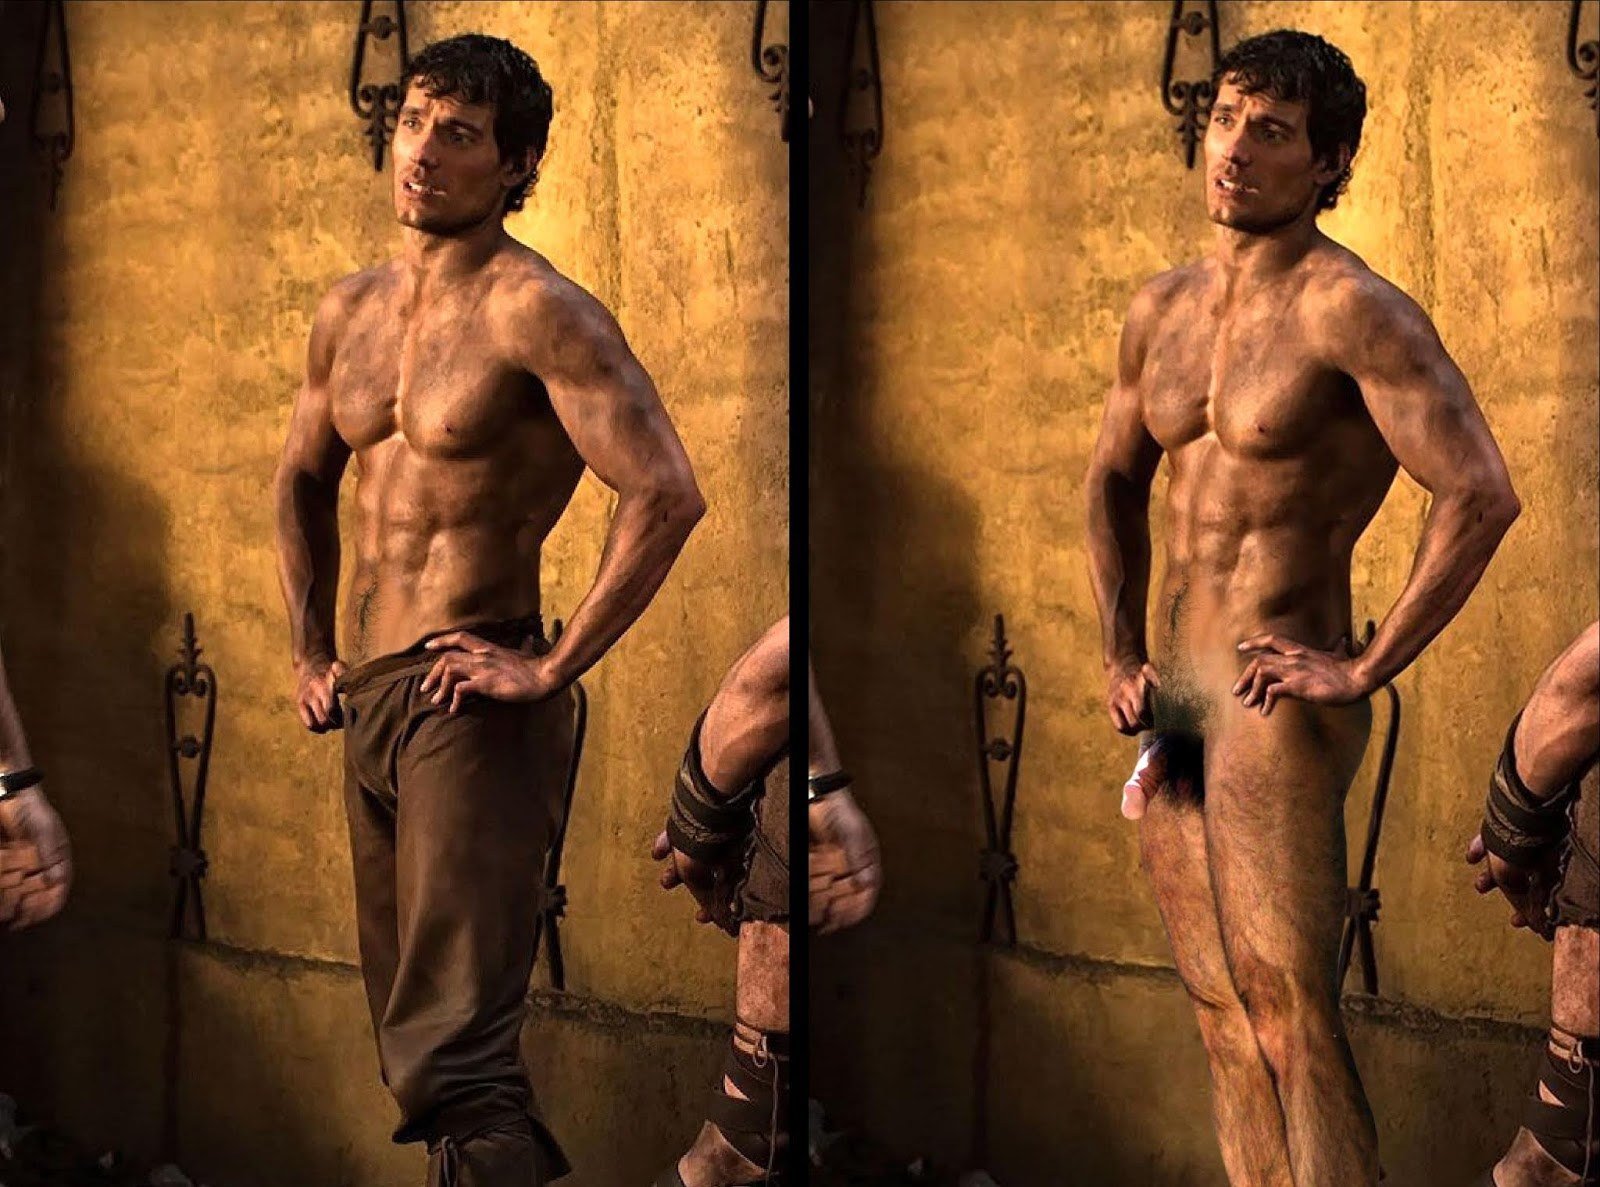 carlo lagura recommends henry caville nude pic